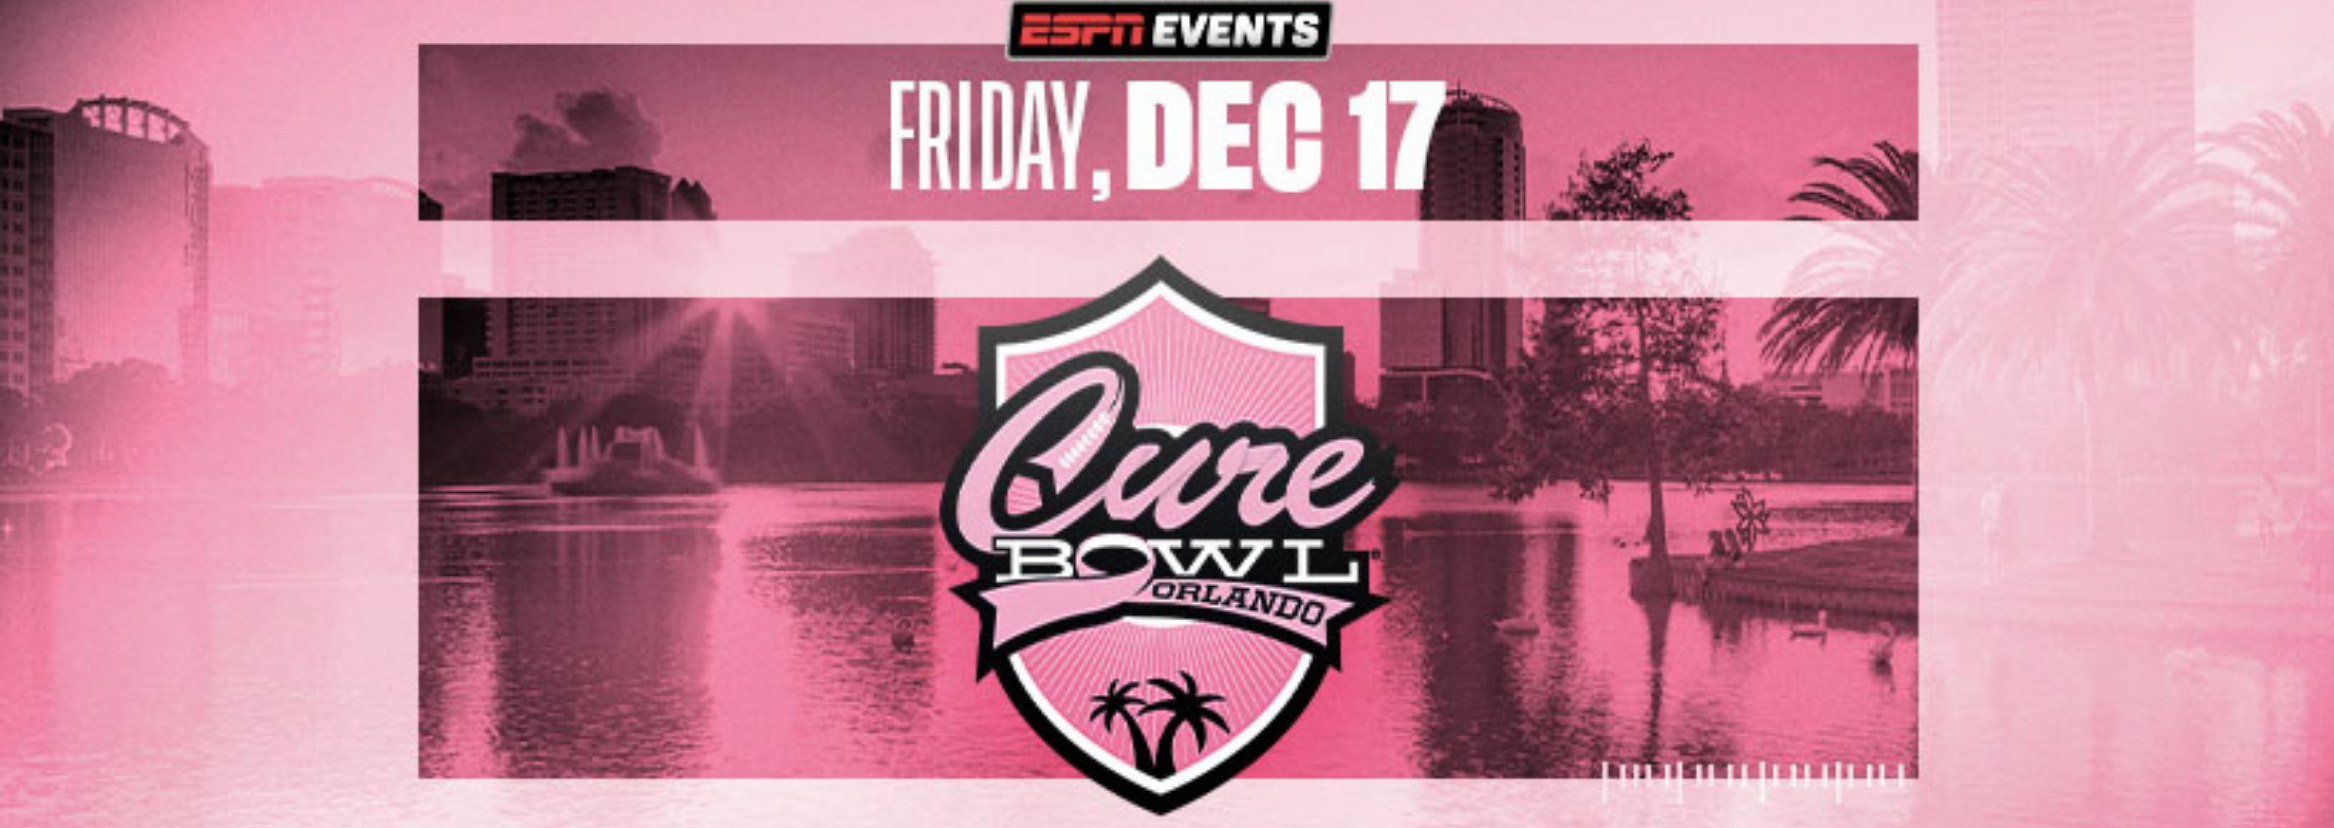 Tickets Orlando College Bowl Game The Cure Bowl